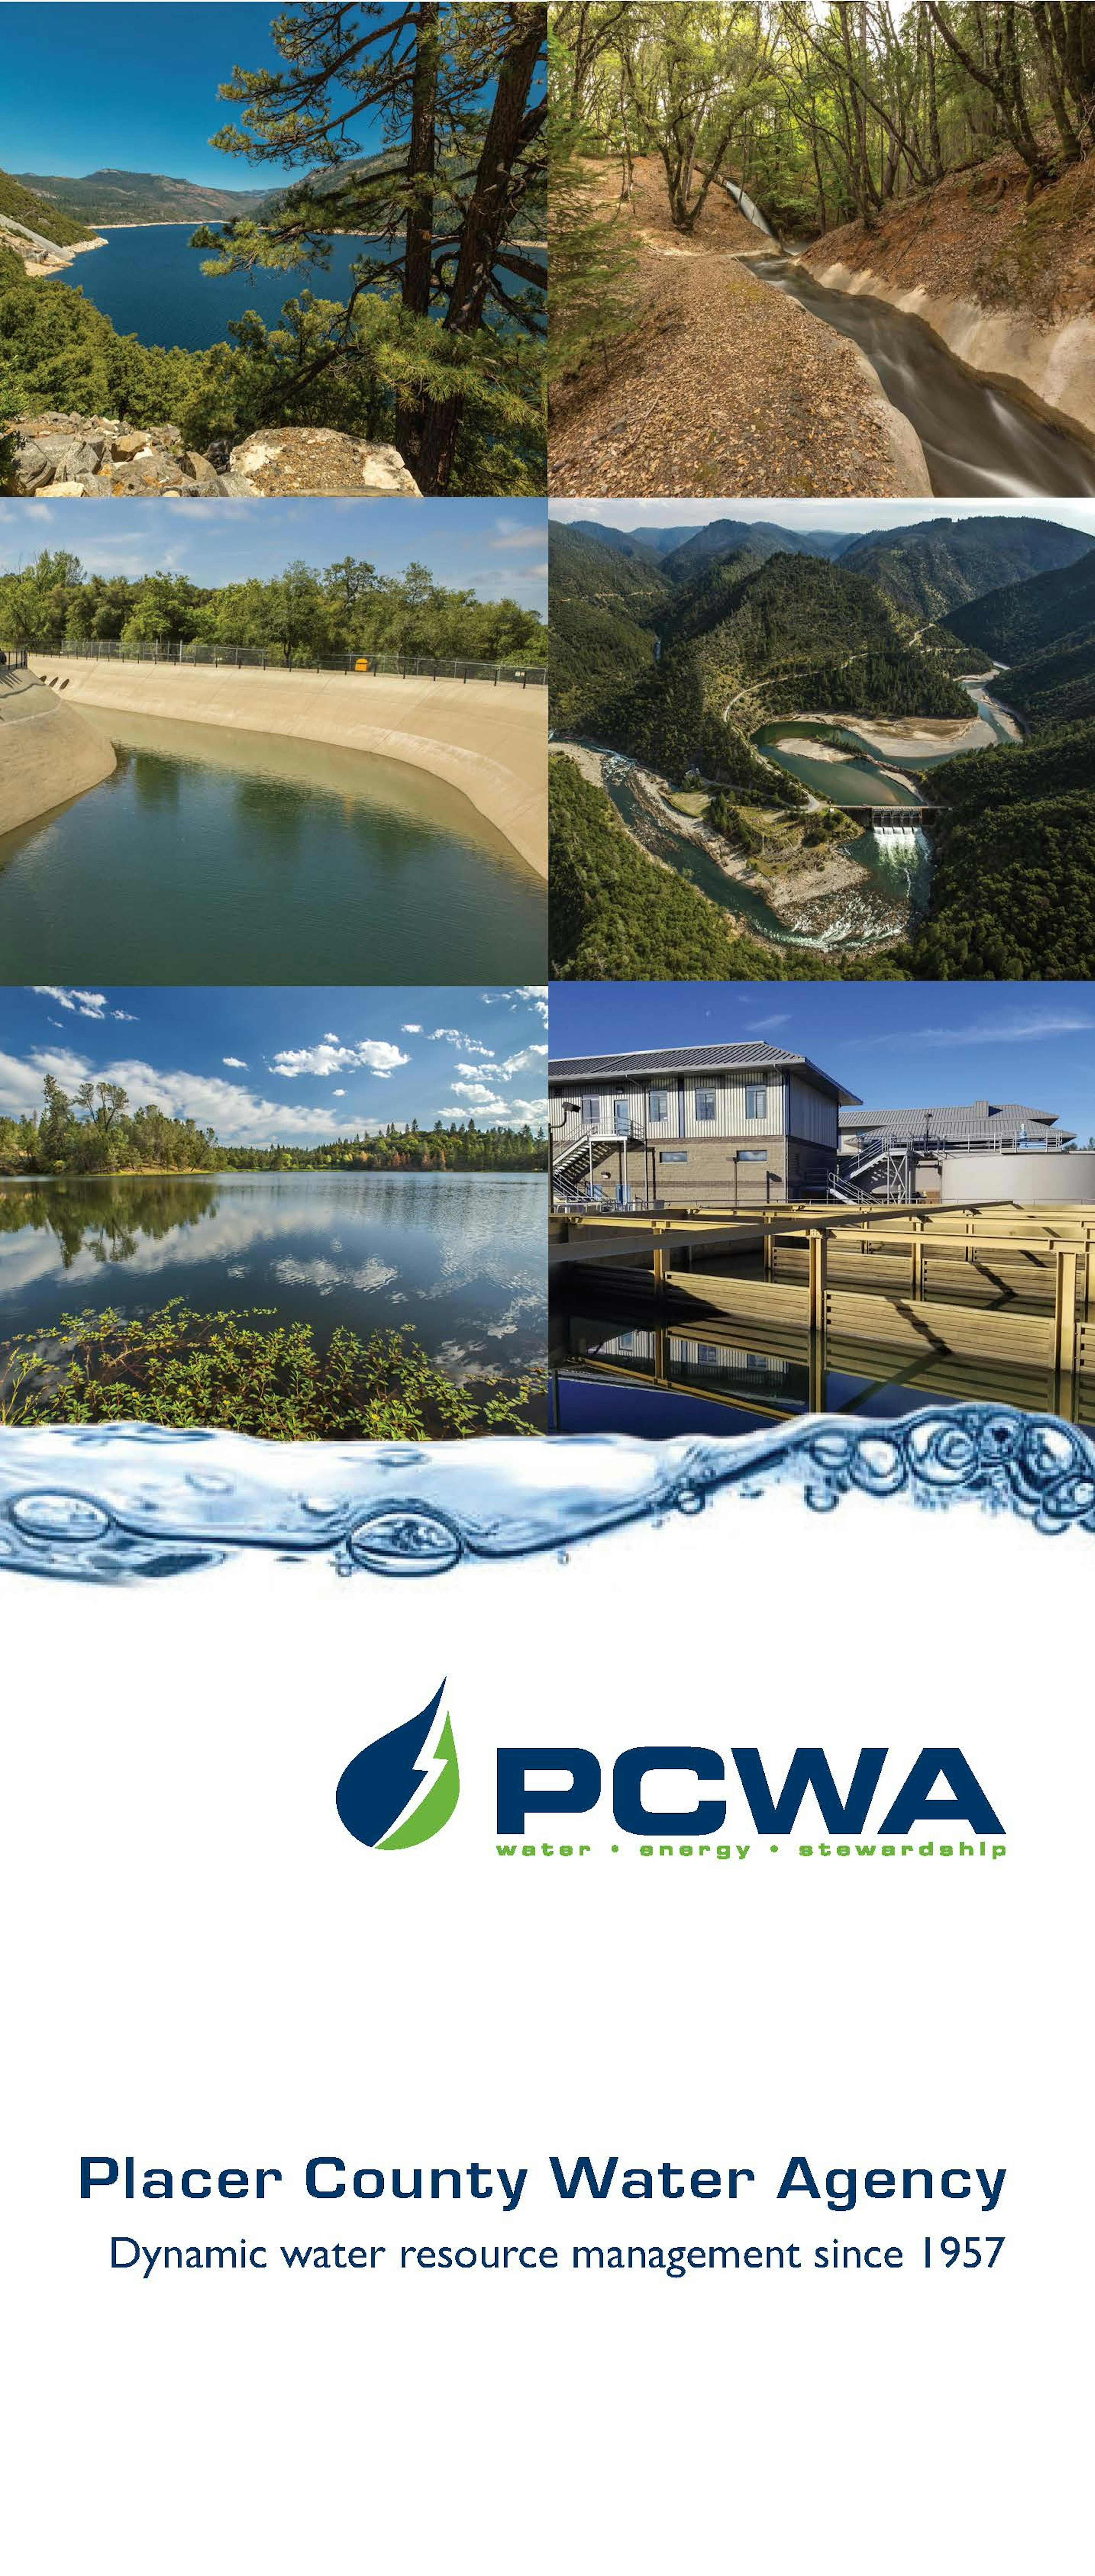 Thumbnail image for About PCWA publication